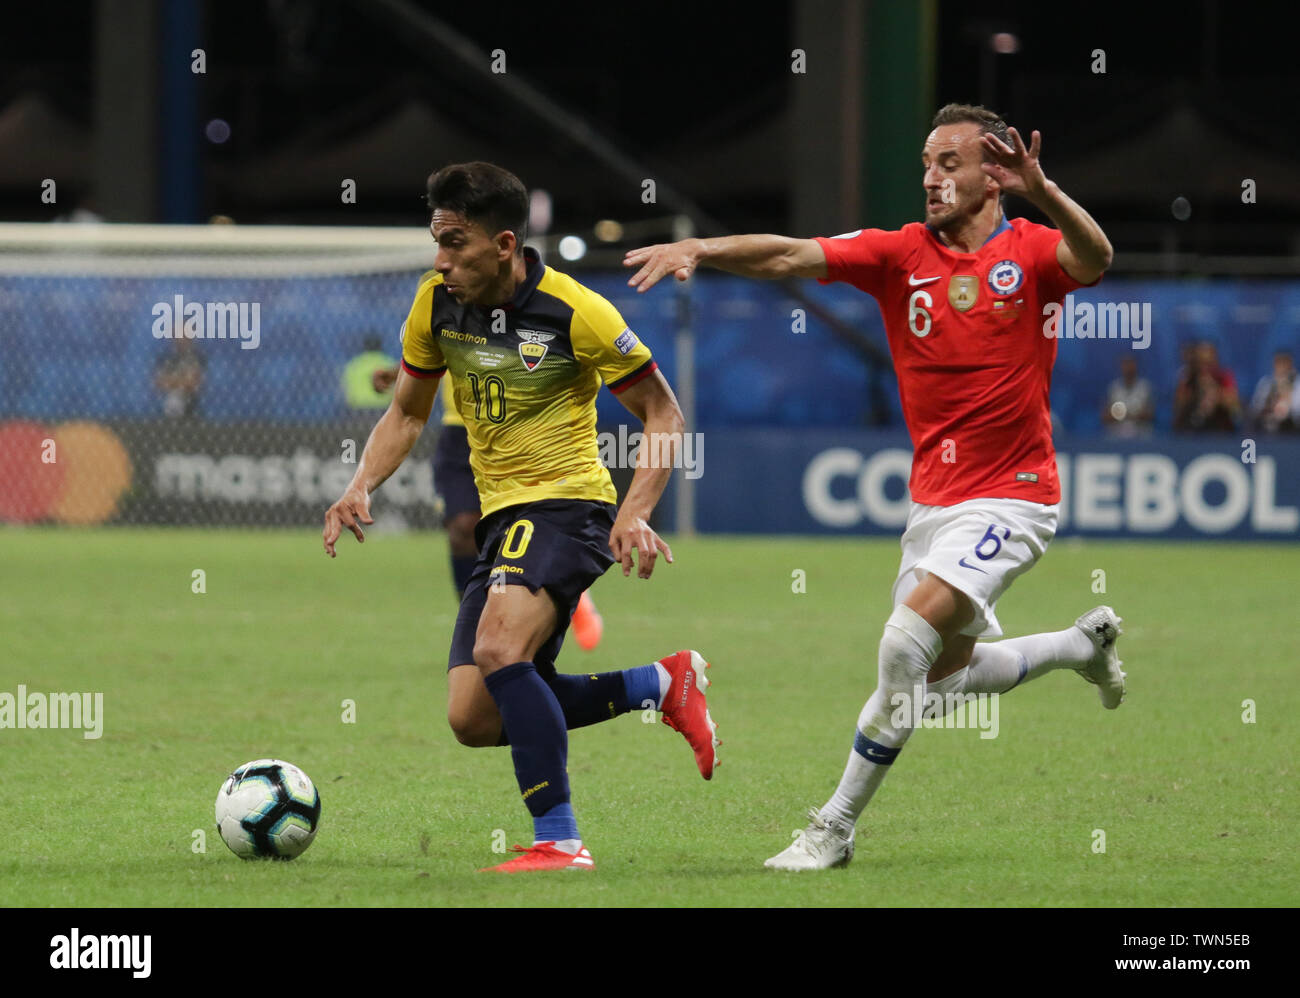 Salvador, Brazil. 21st June, 2019. Angel Mena and Fuenzalida, during a match between Ecuador and Chile, valid for the 2019 Copa America group stage, held this Friday (21) at the Fonte Nova Arena in Salvador, Bahia, Brazil. Credit: Tiago Caldas/FotoArena/Alamy Live News Stock Photo